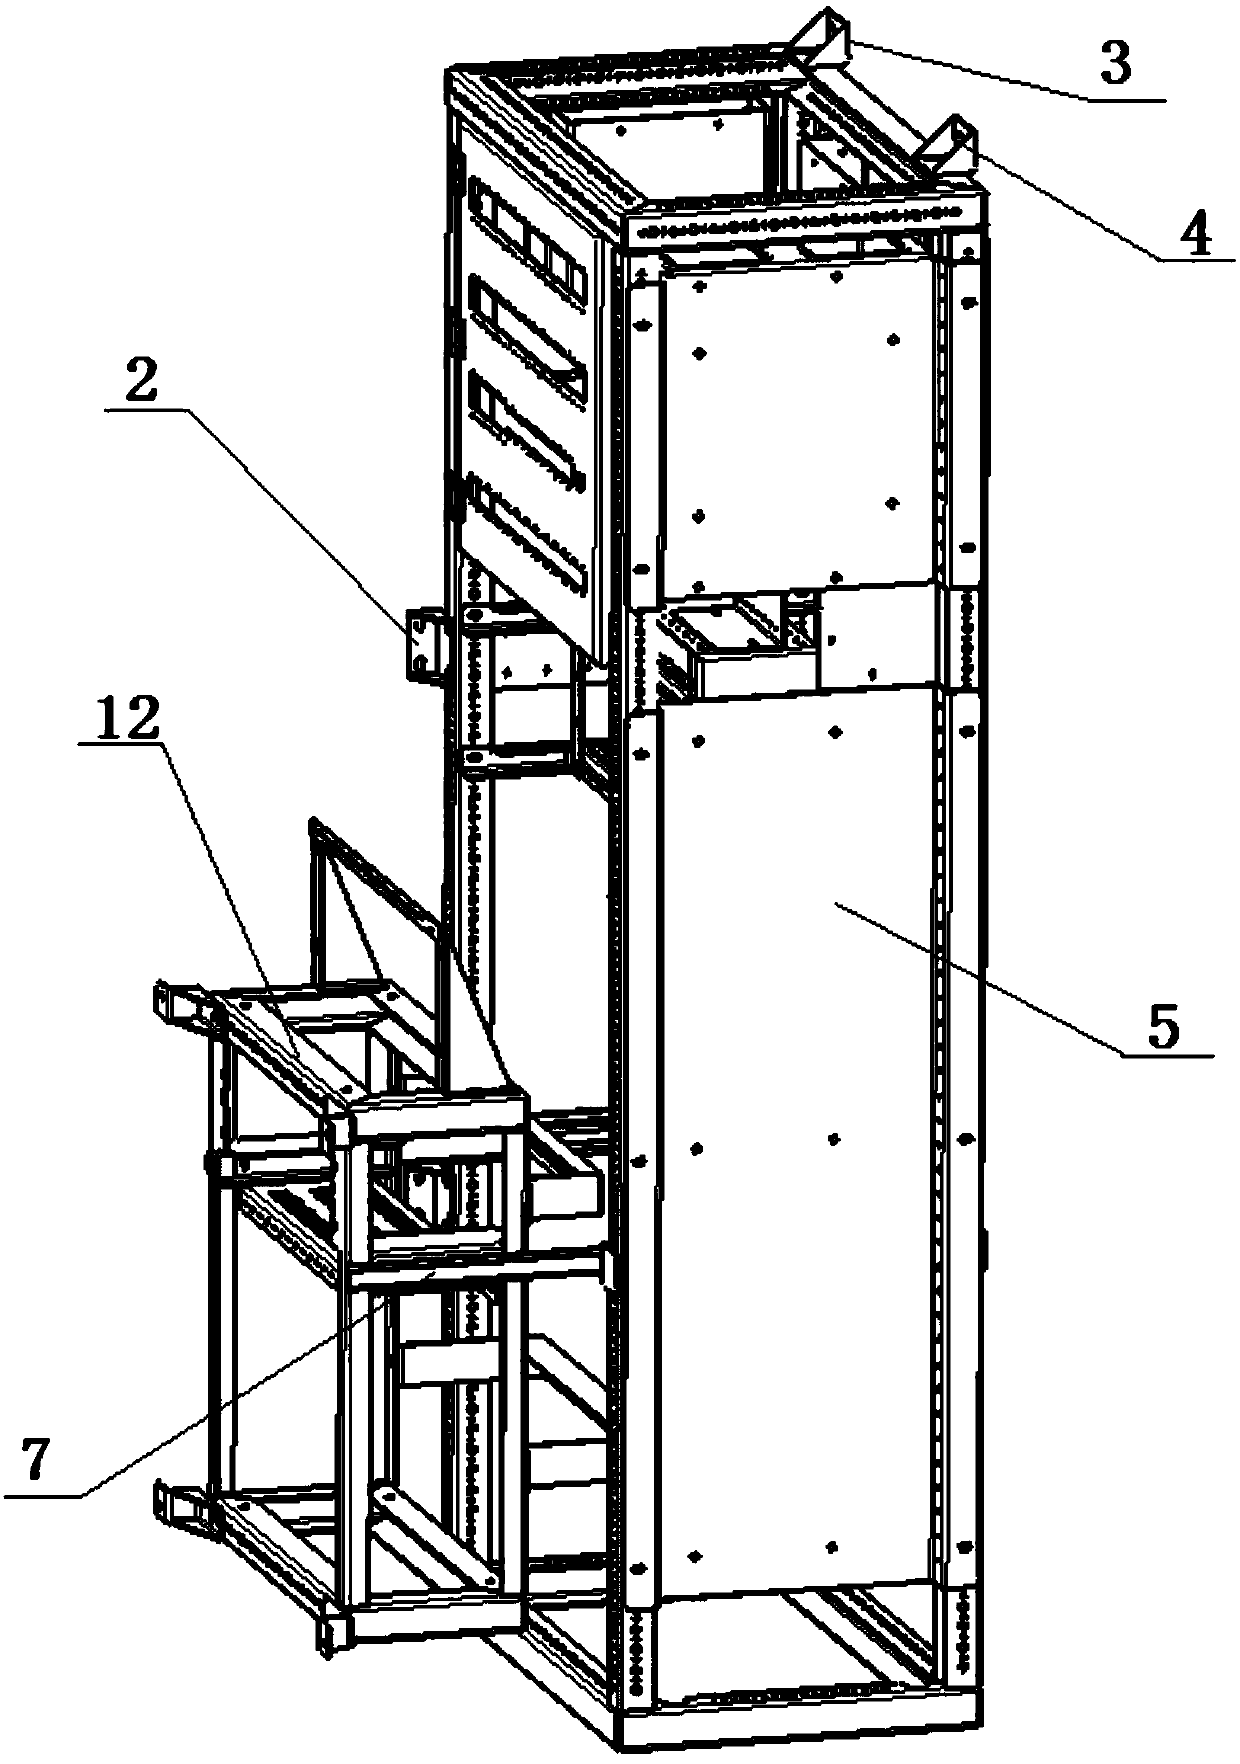 Installing structure of railway vehicle signal cabinet